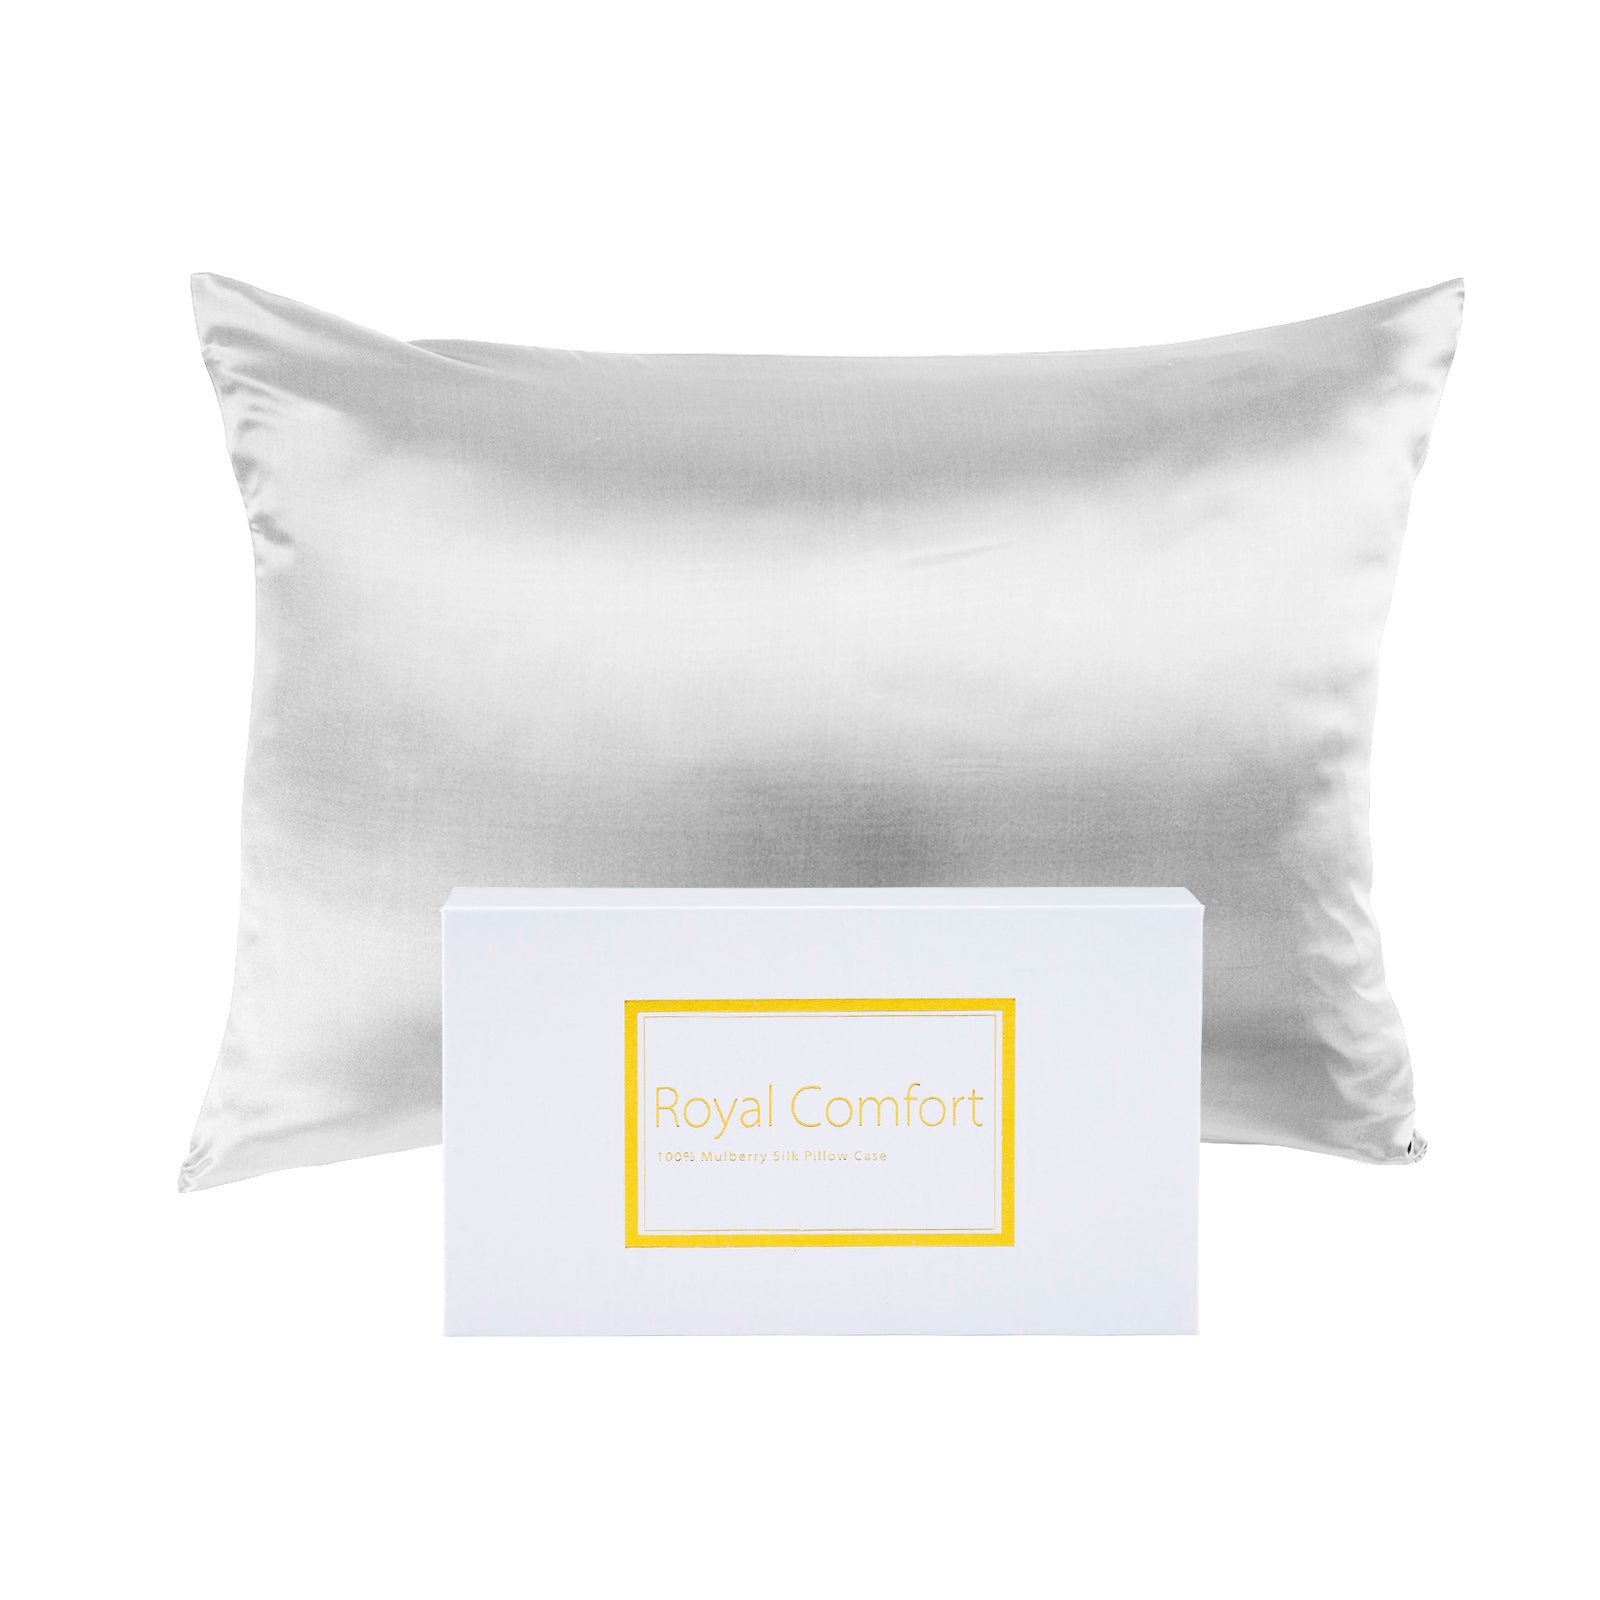 Mulberry Silk Pillow Case Twin Pack - Size: 51X76Cm - Silver